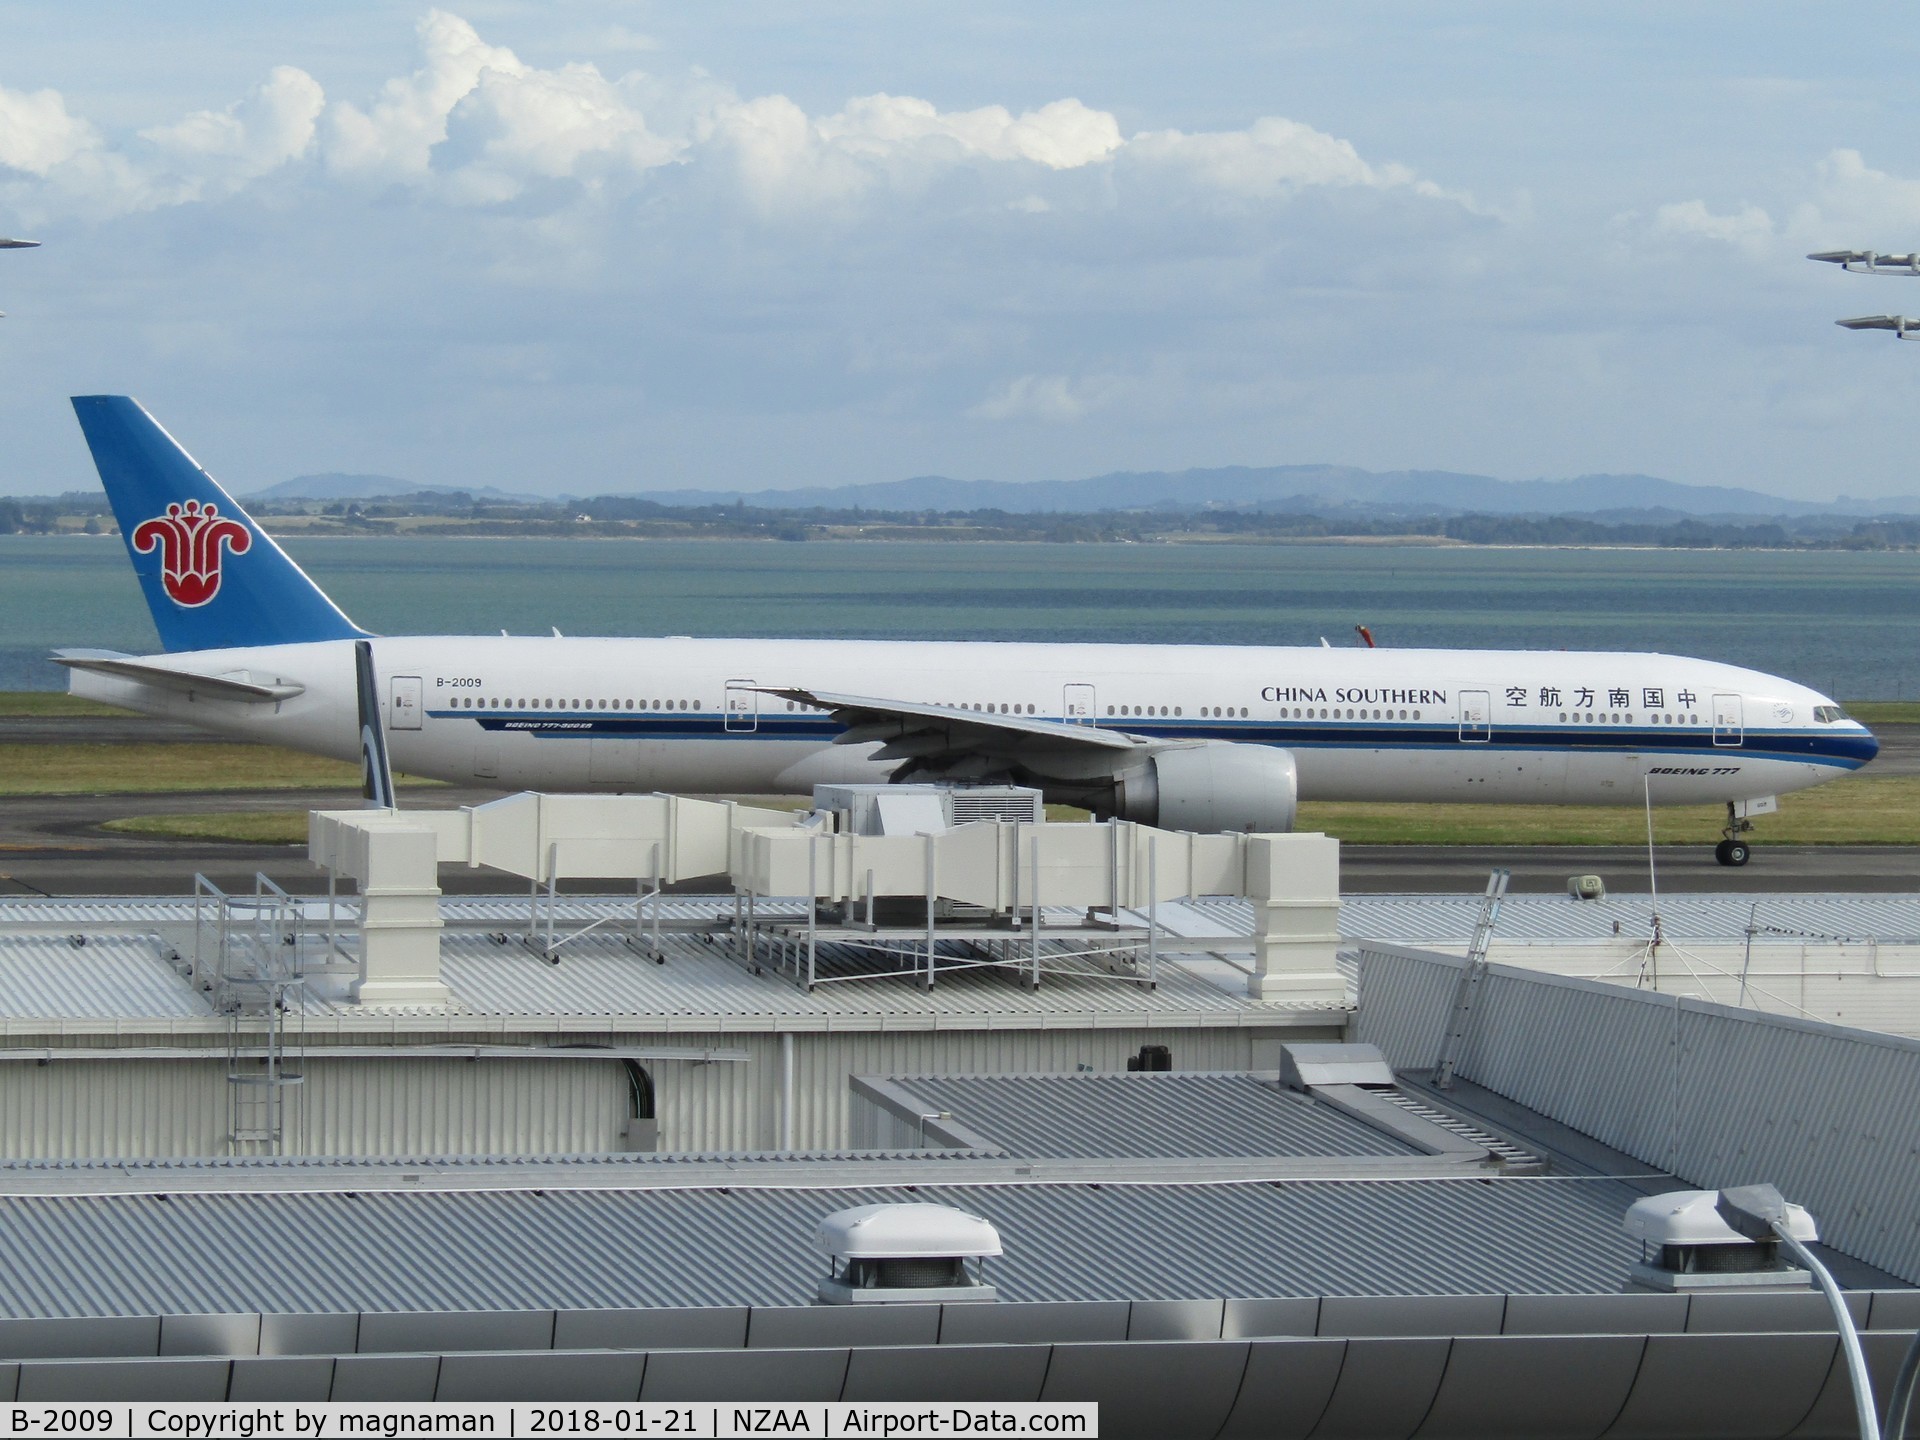 B-2009, 2014 Boeing 777-31B/ER C/N 43223, taxying to stand